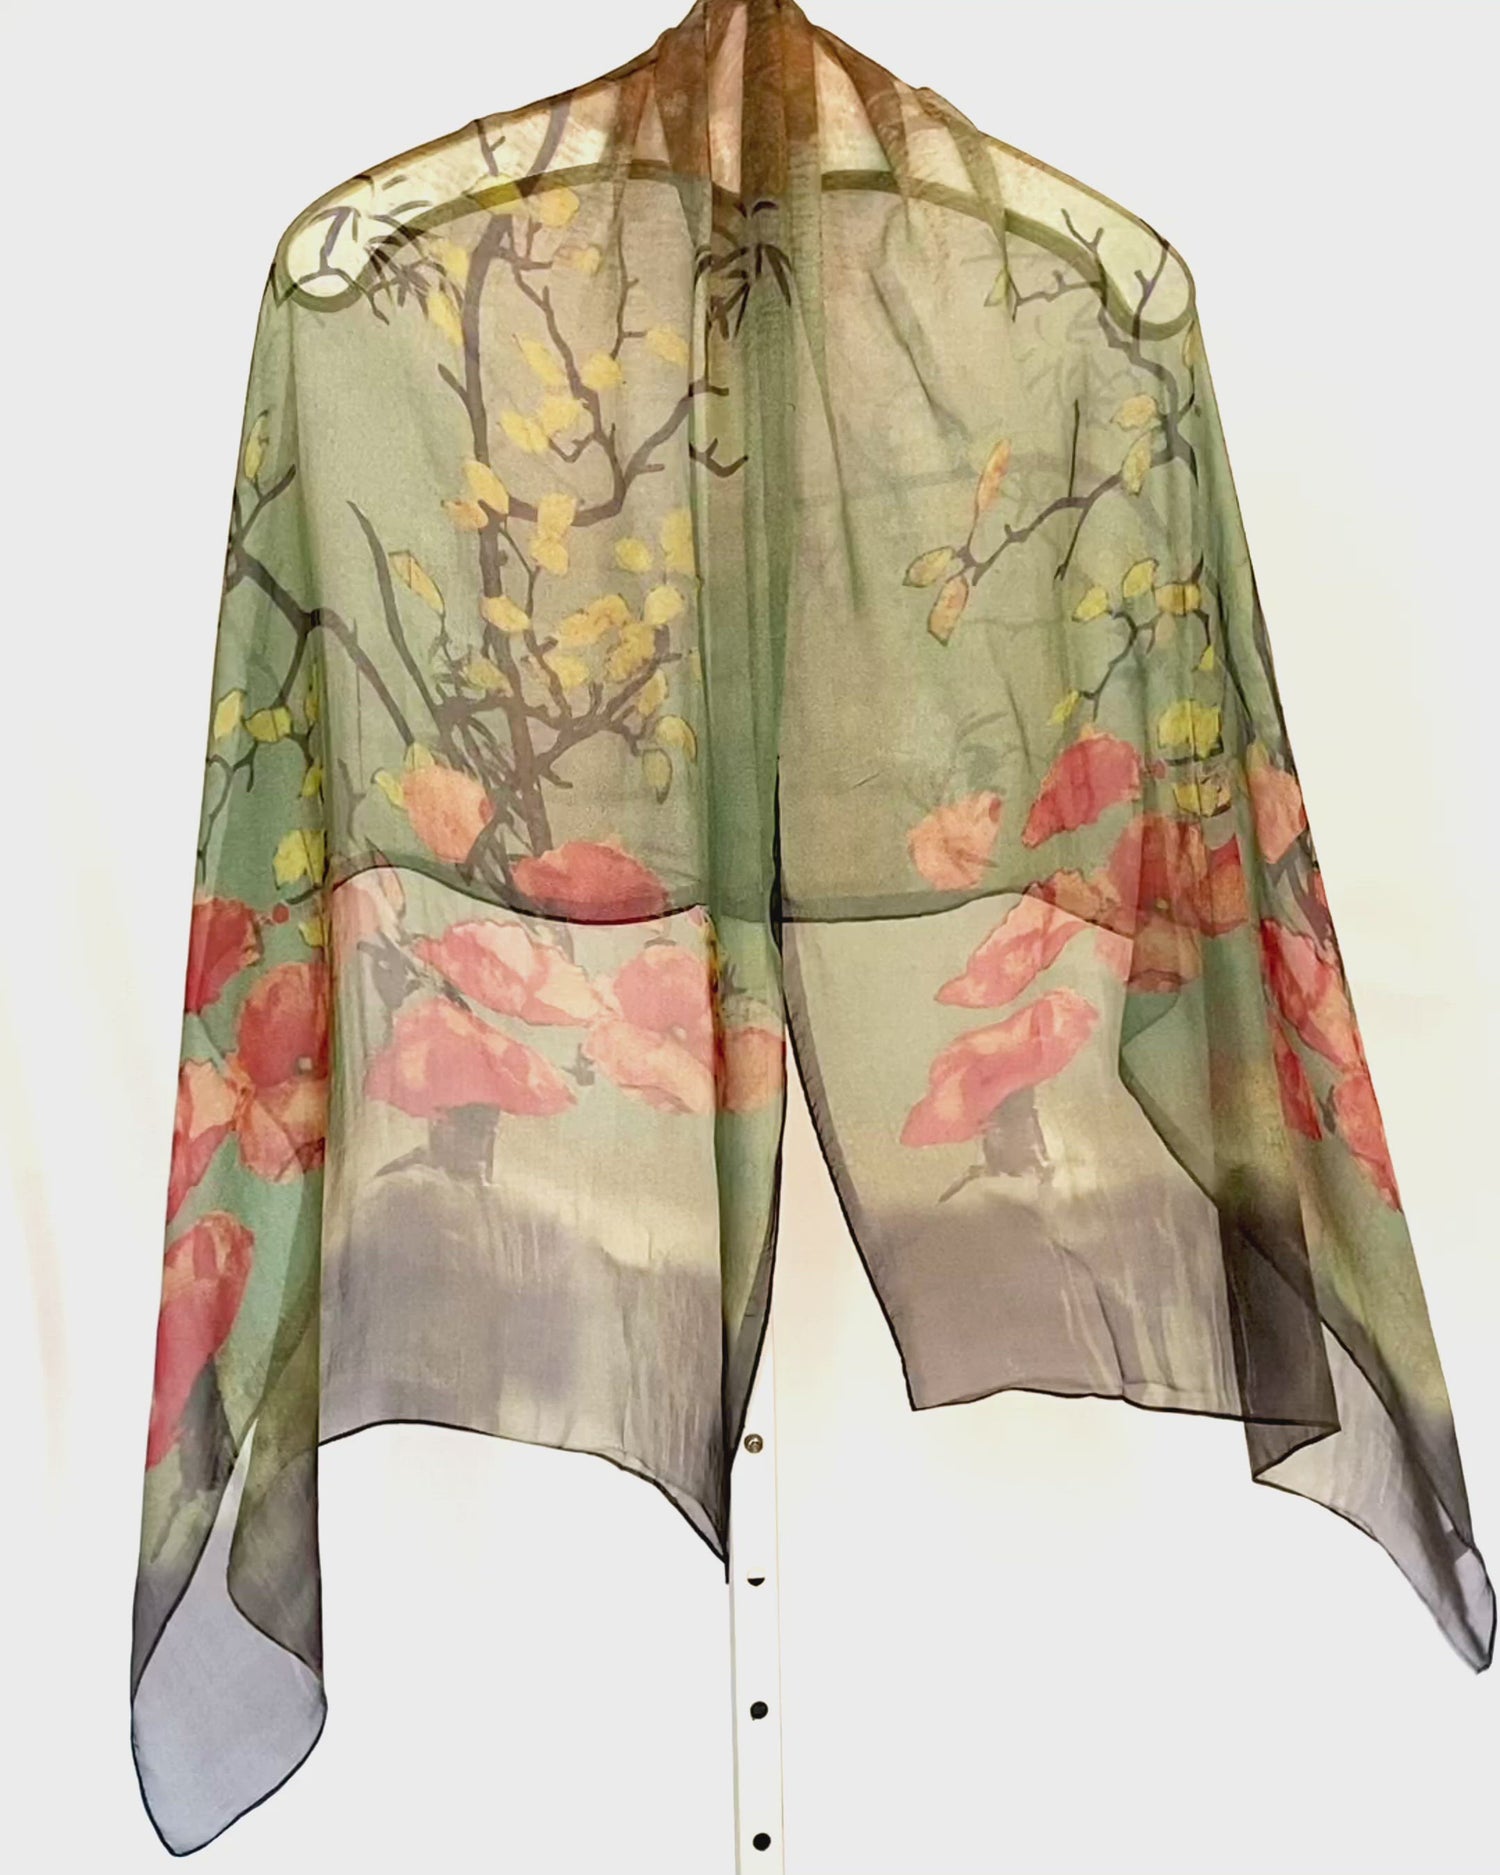 Fluttering in the breeze silk floral scarf. Red blossom design on this sheer pretty drape scarf